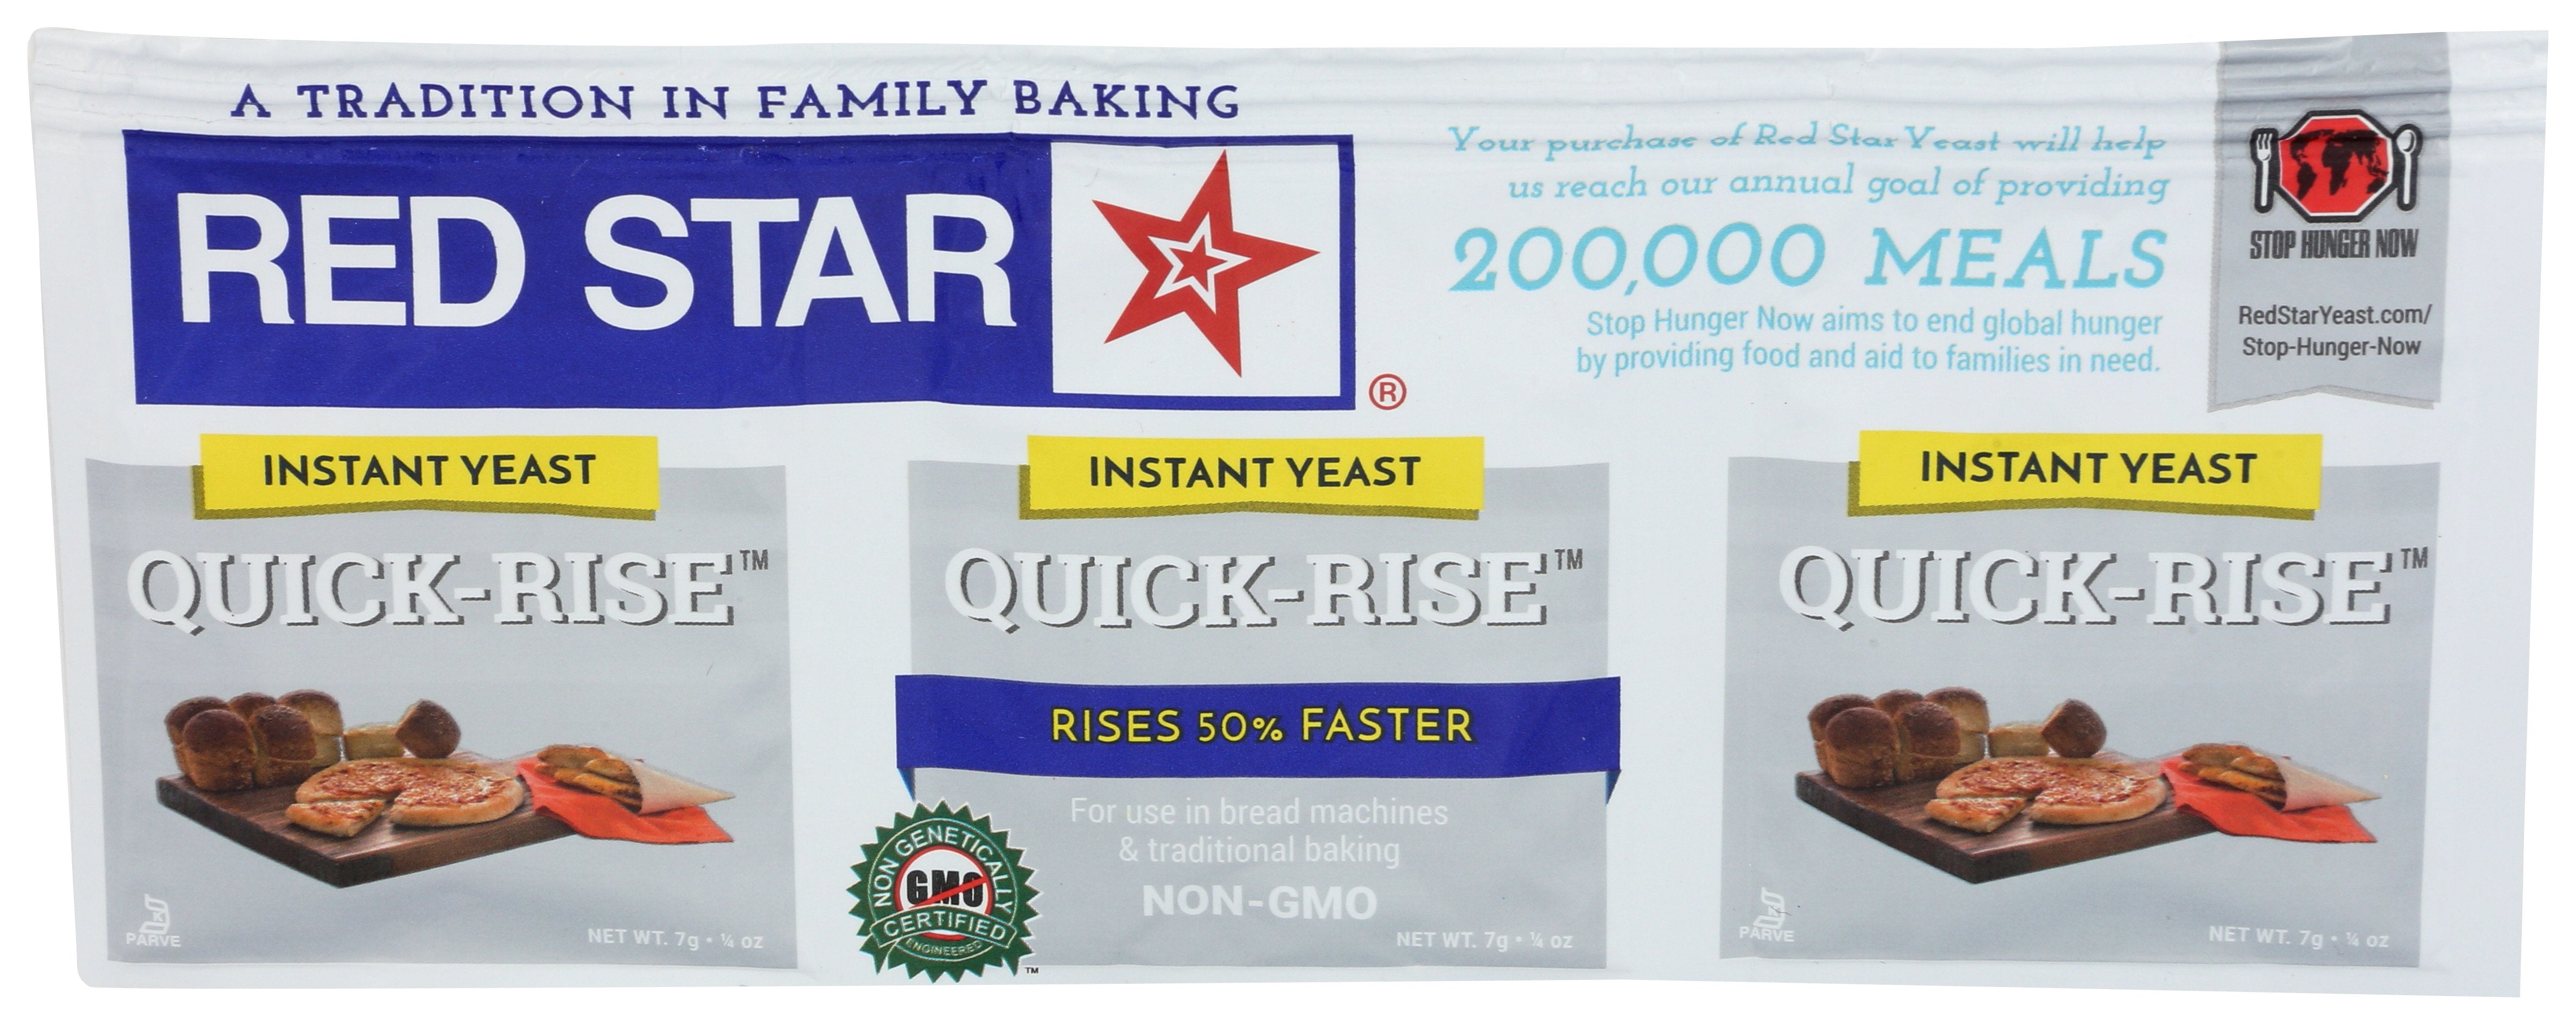 RED STAR YEAST QUICK RISE ENV 3PK - Case of 18